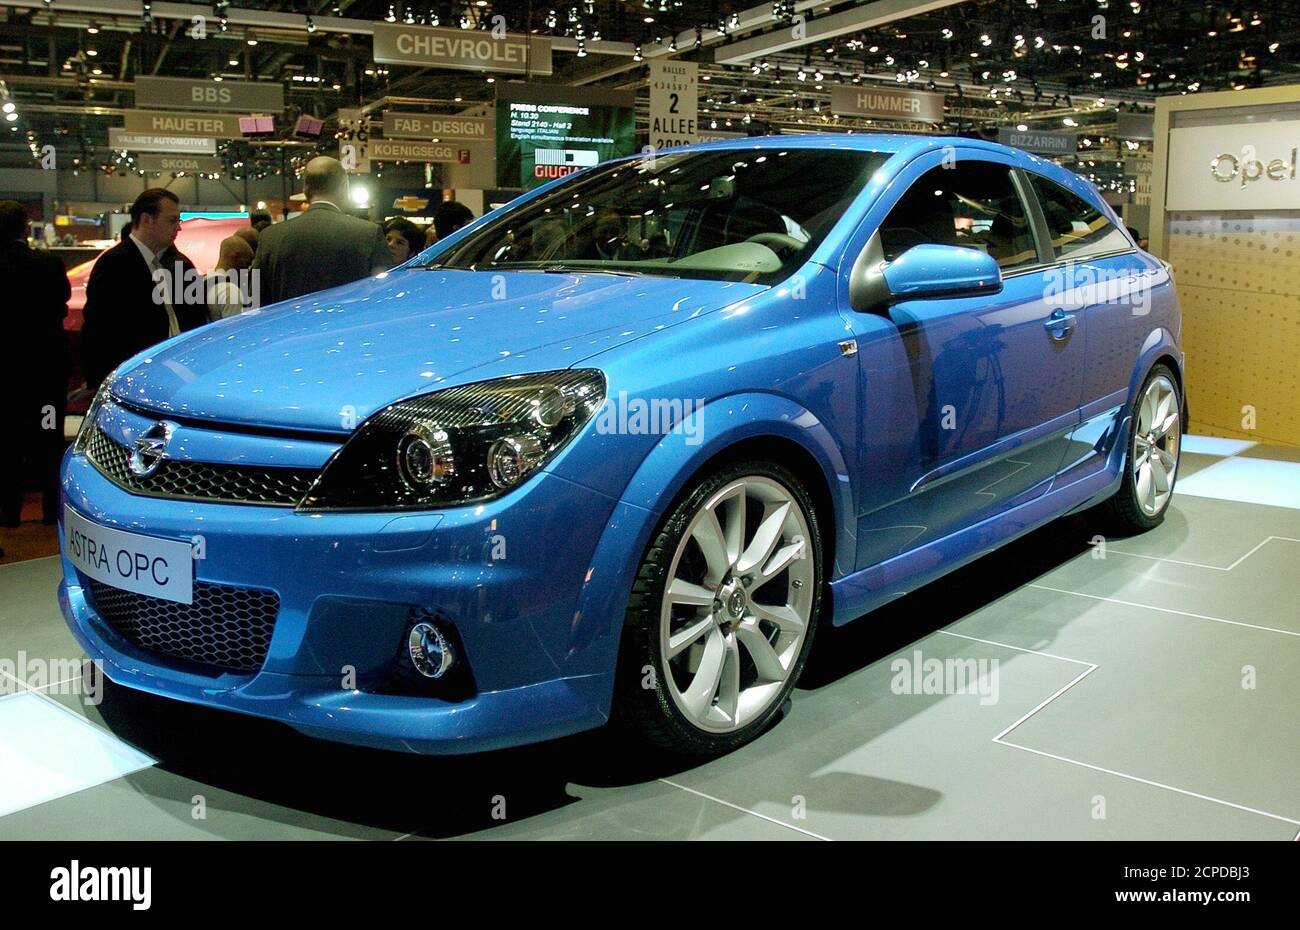 Opel astra opc hi-res stock images - Alamy